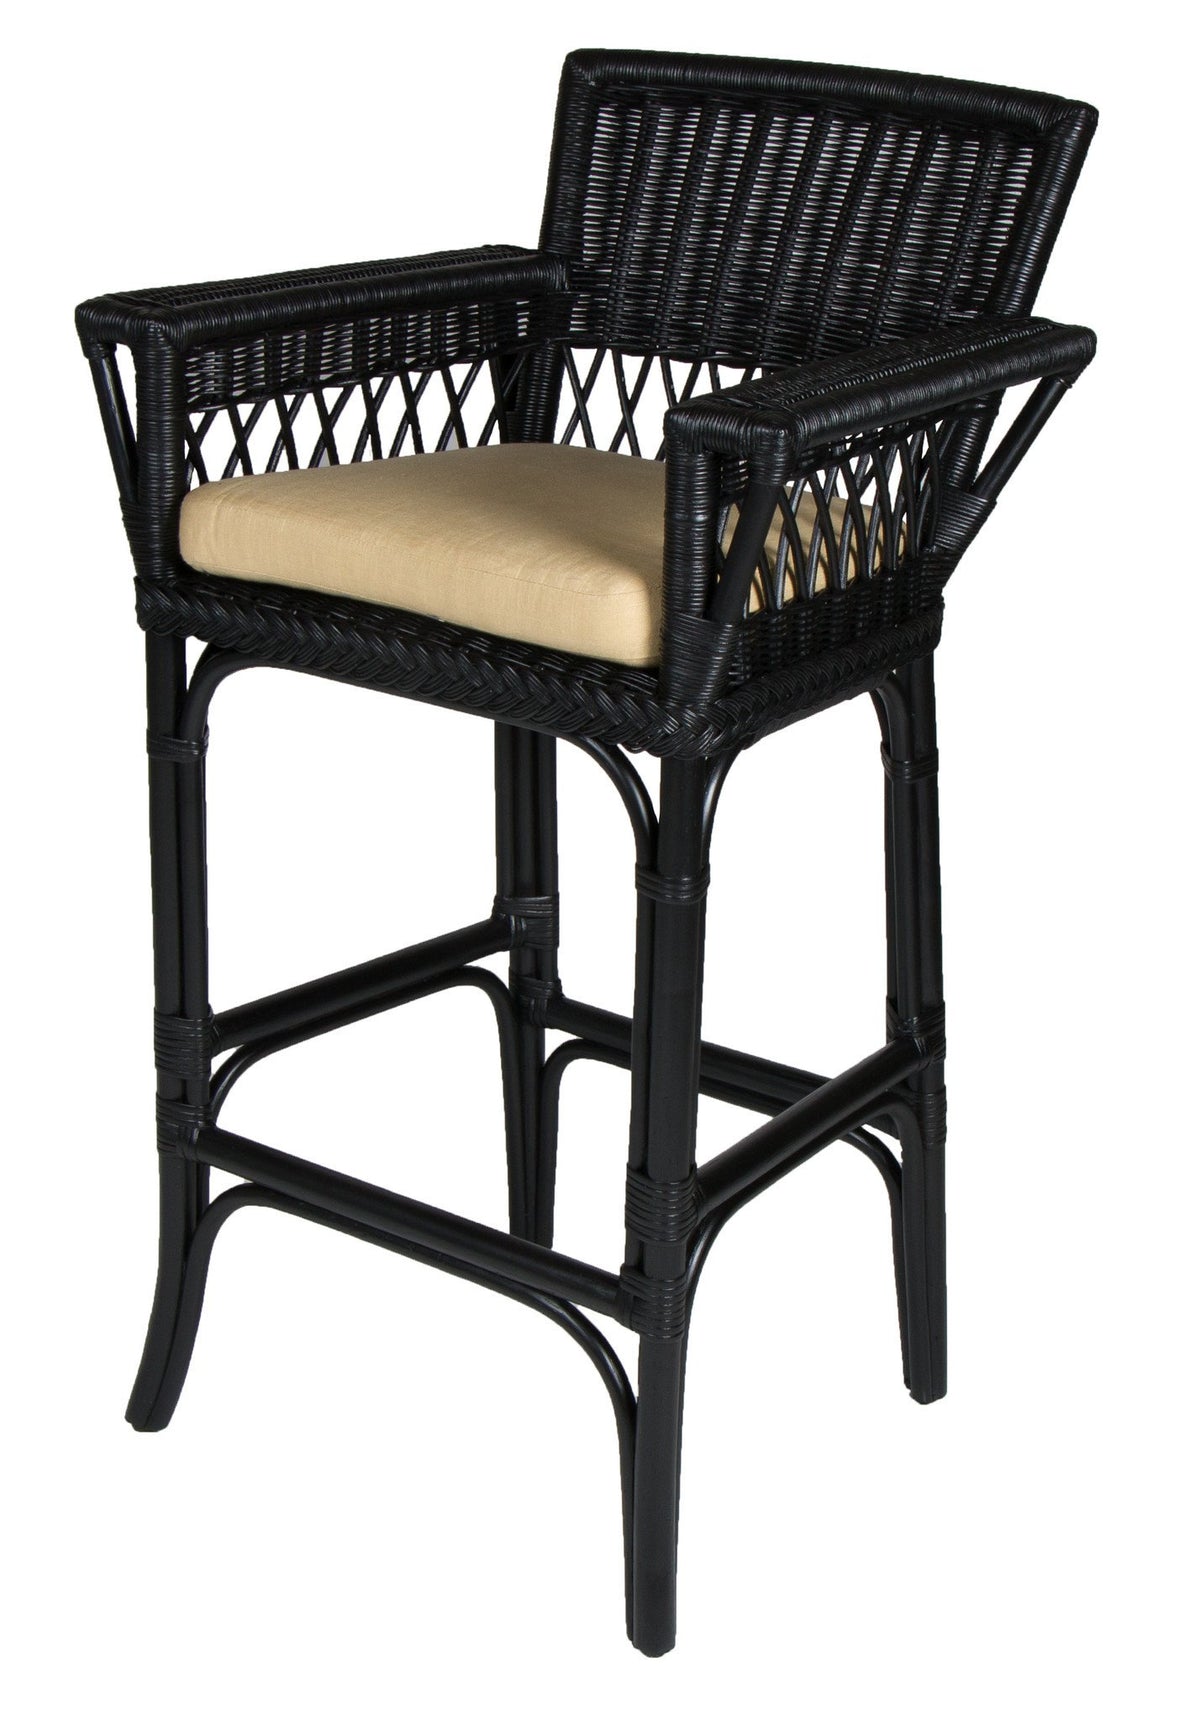 Designer Wicker &amp; Rattan By Tribor Windsor Barstool Armless by Design Wicker from Tribor Bar Stool - Rattan Imports